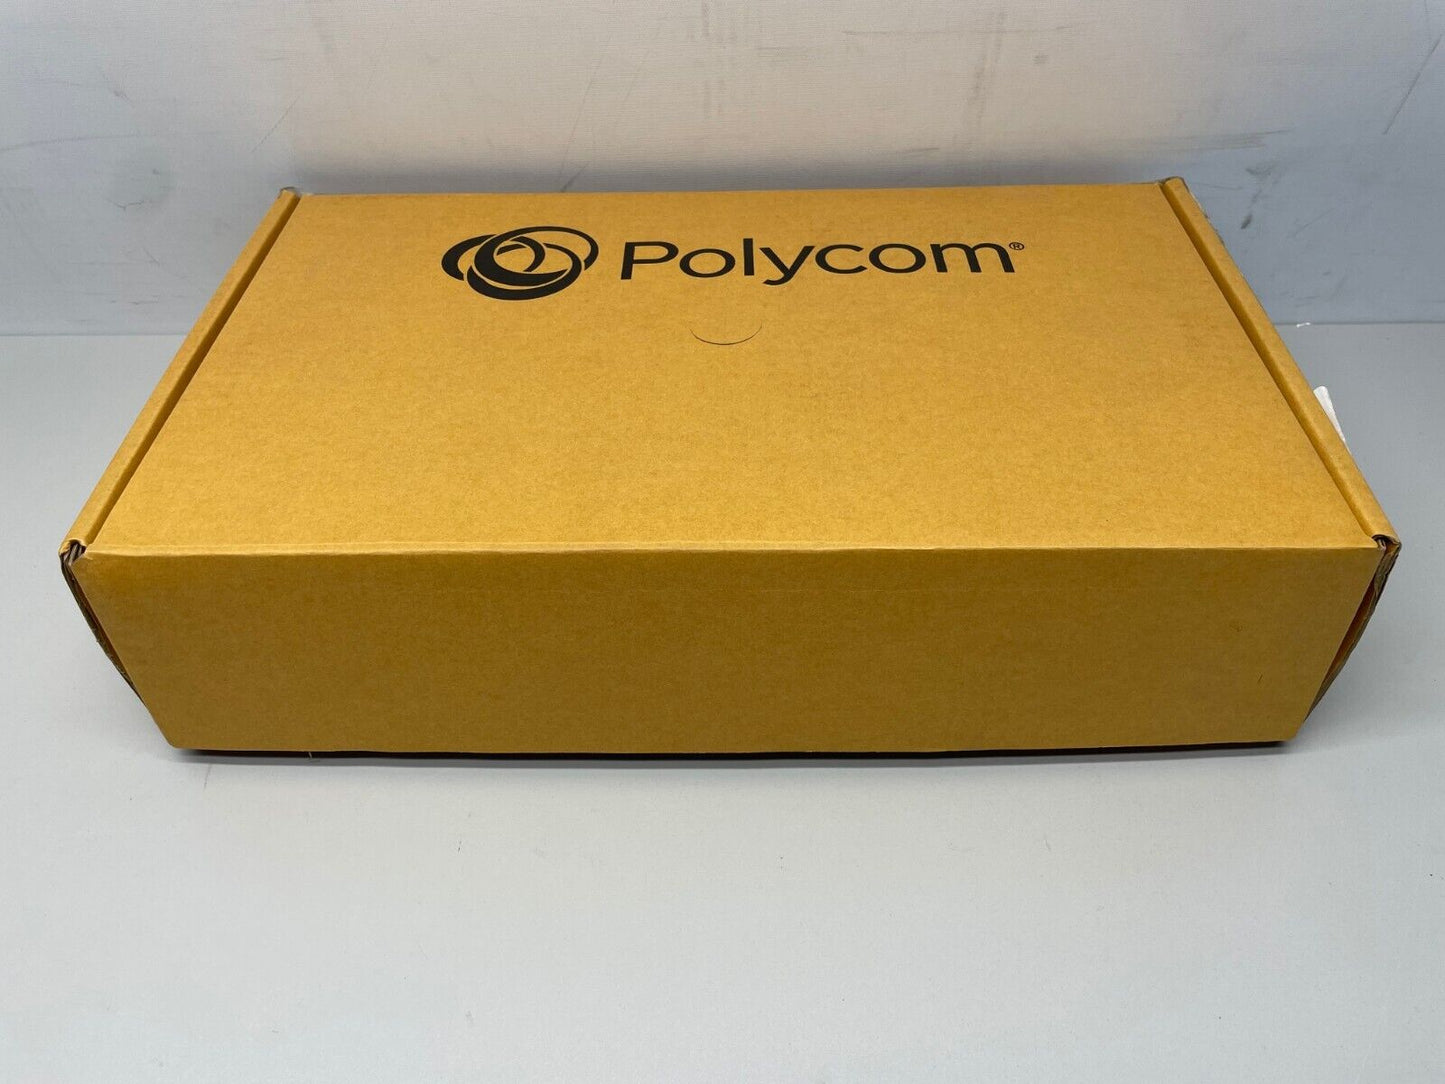 Polycom 2200-23810-002 White HDX Conferencing Ceiling Microphone NEW